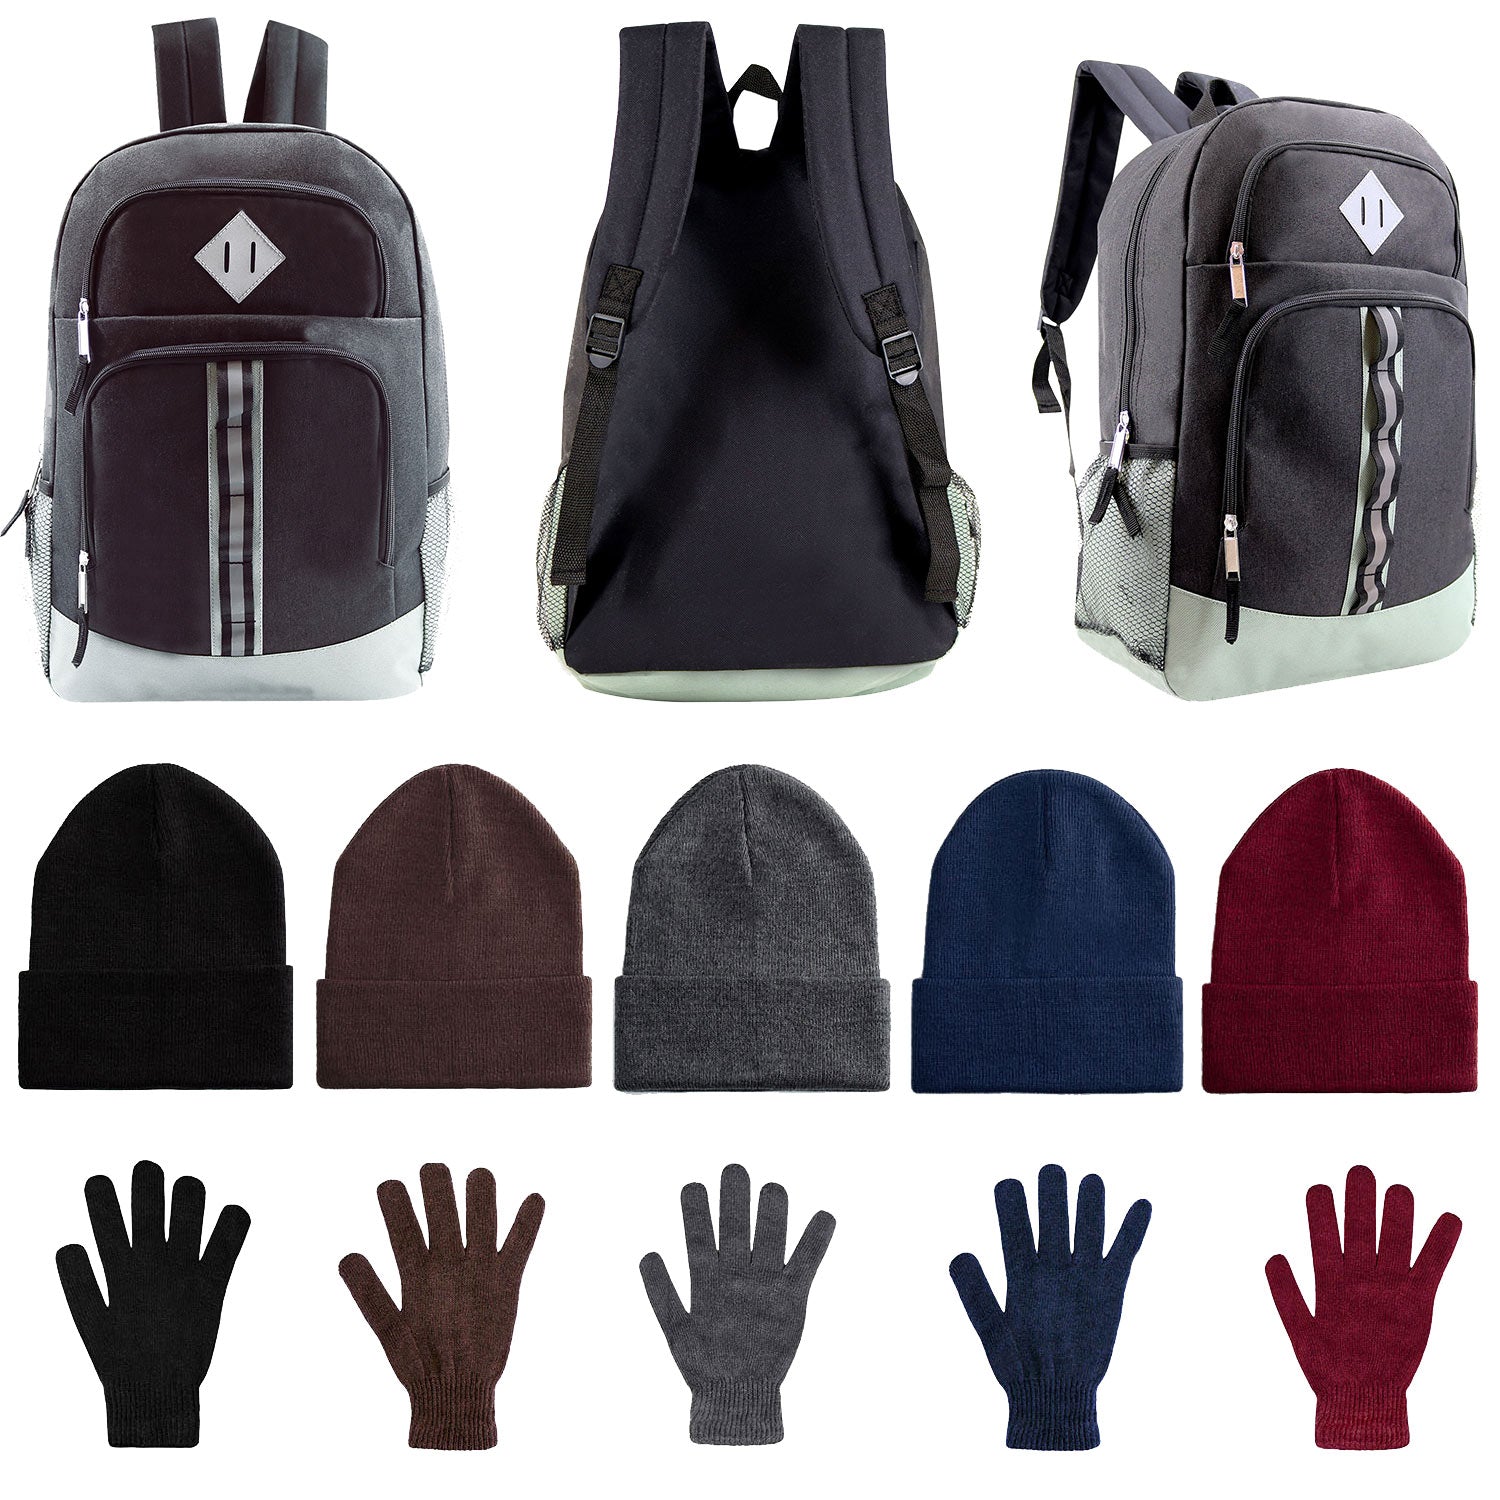 Bulk Case of 12 18" Black Backpacks and 12 Winter Gloves & Hats - Wholesale Care Package - Emergencies, Homeless, Charity